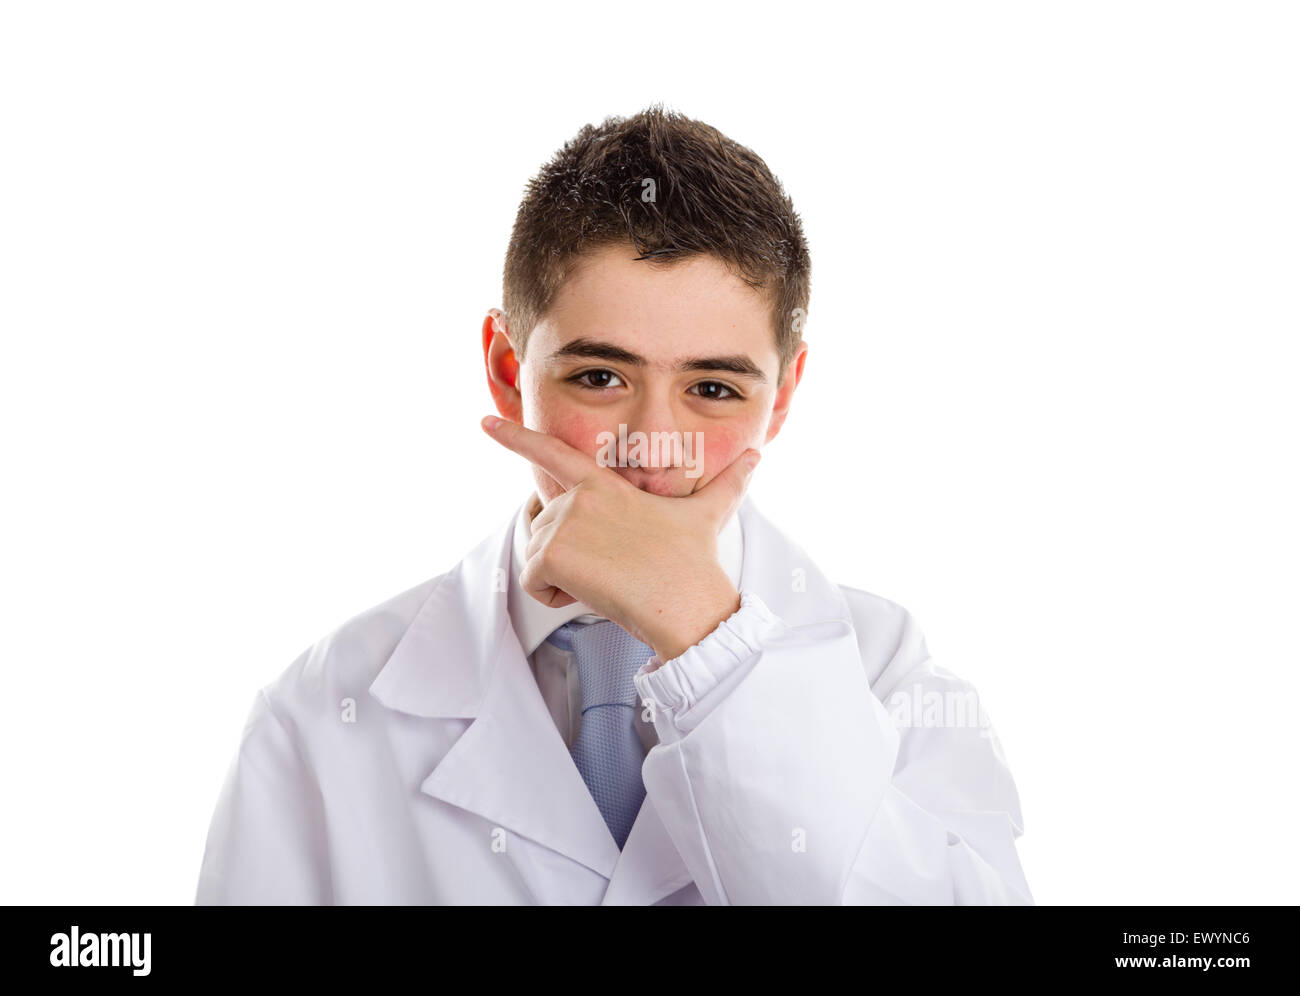 A boy doctor in white coat and blue tie helps to feel medicine more friendly: he covering his mouth while thinking. His acne skin has not ben retouched Stock Photo